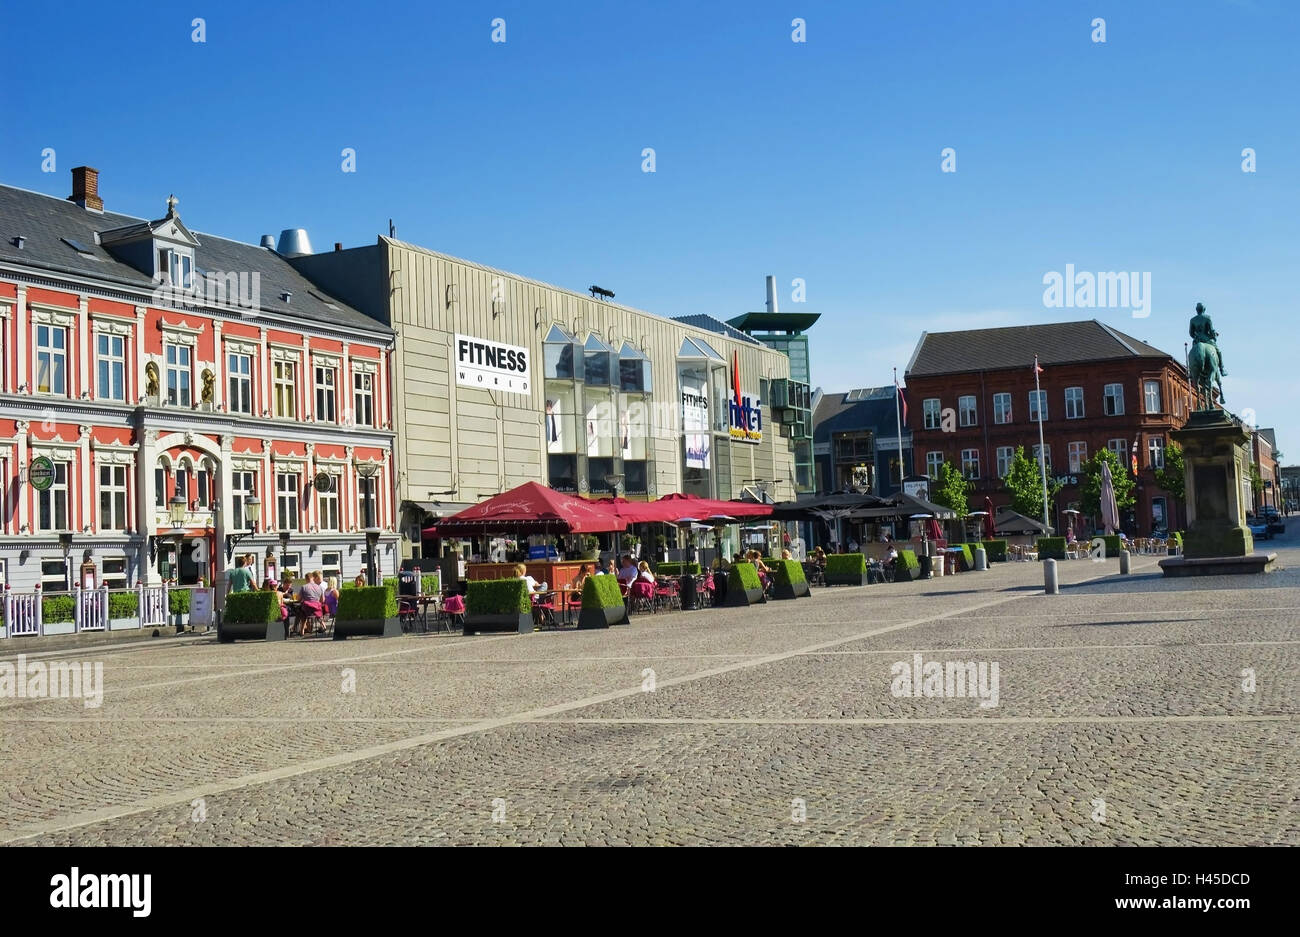 Denmark, Jutland, Esbjerg, city hall square, cafe, guests, no model release, destination, town, centre, building, houses, architecture, gastronomy, street cafe, summer, sunshades, people, tourists, tourism, outside, monument, Stock Photo